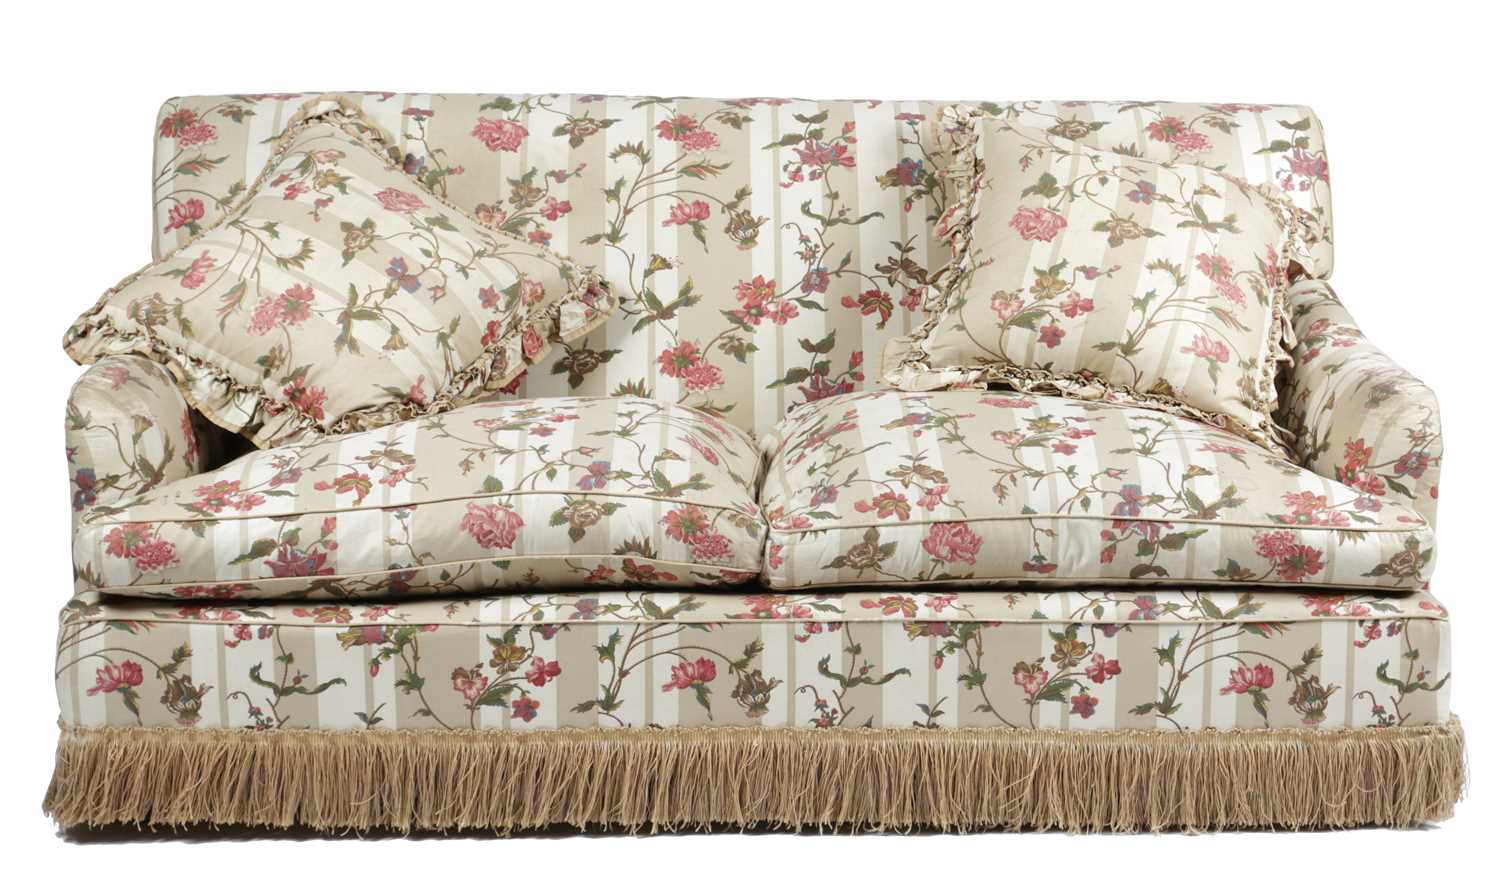 A MODERN TWO SEATER SOFA BY PORTMAN, 20TH CENTURY with chintz floral upholstery, on castors 82.5cm